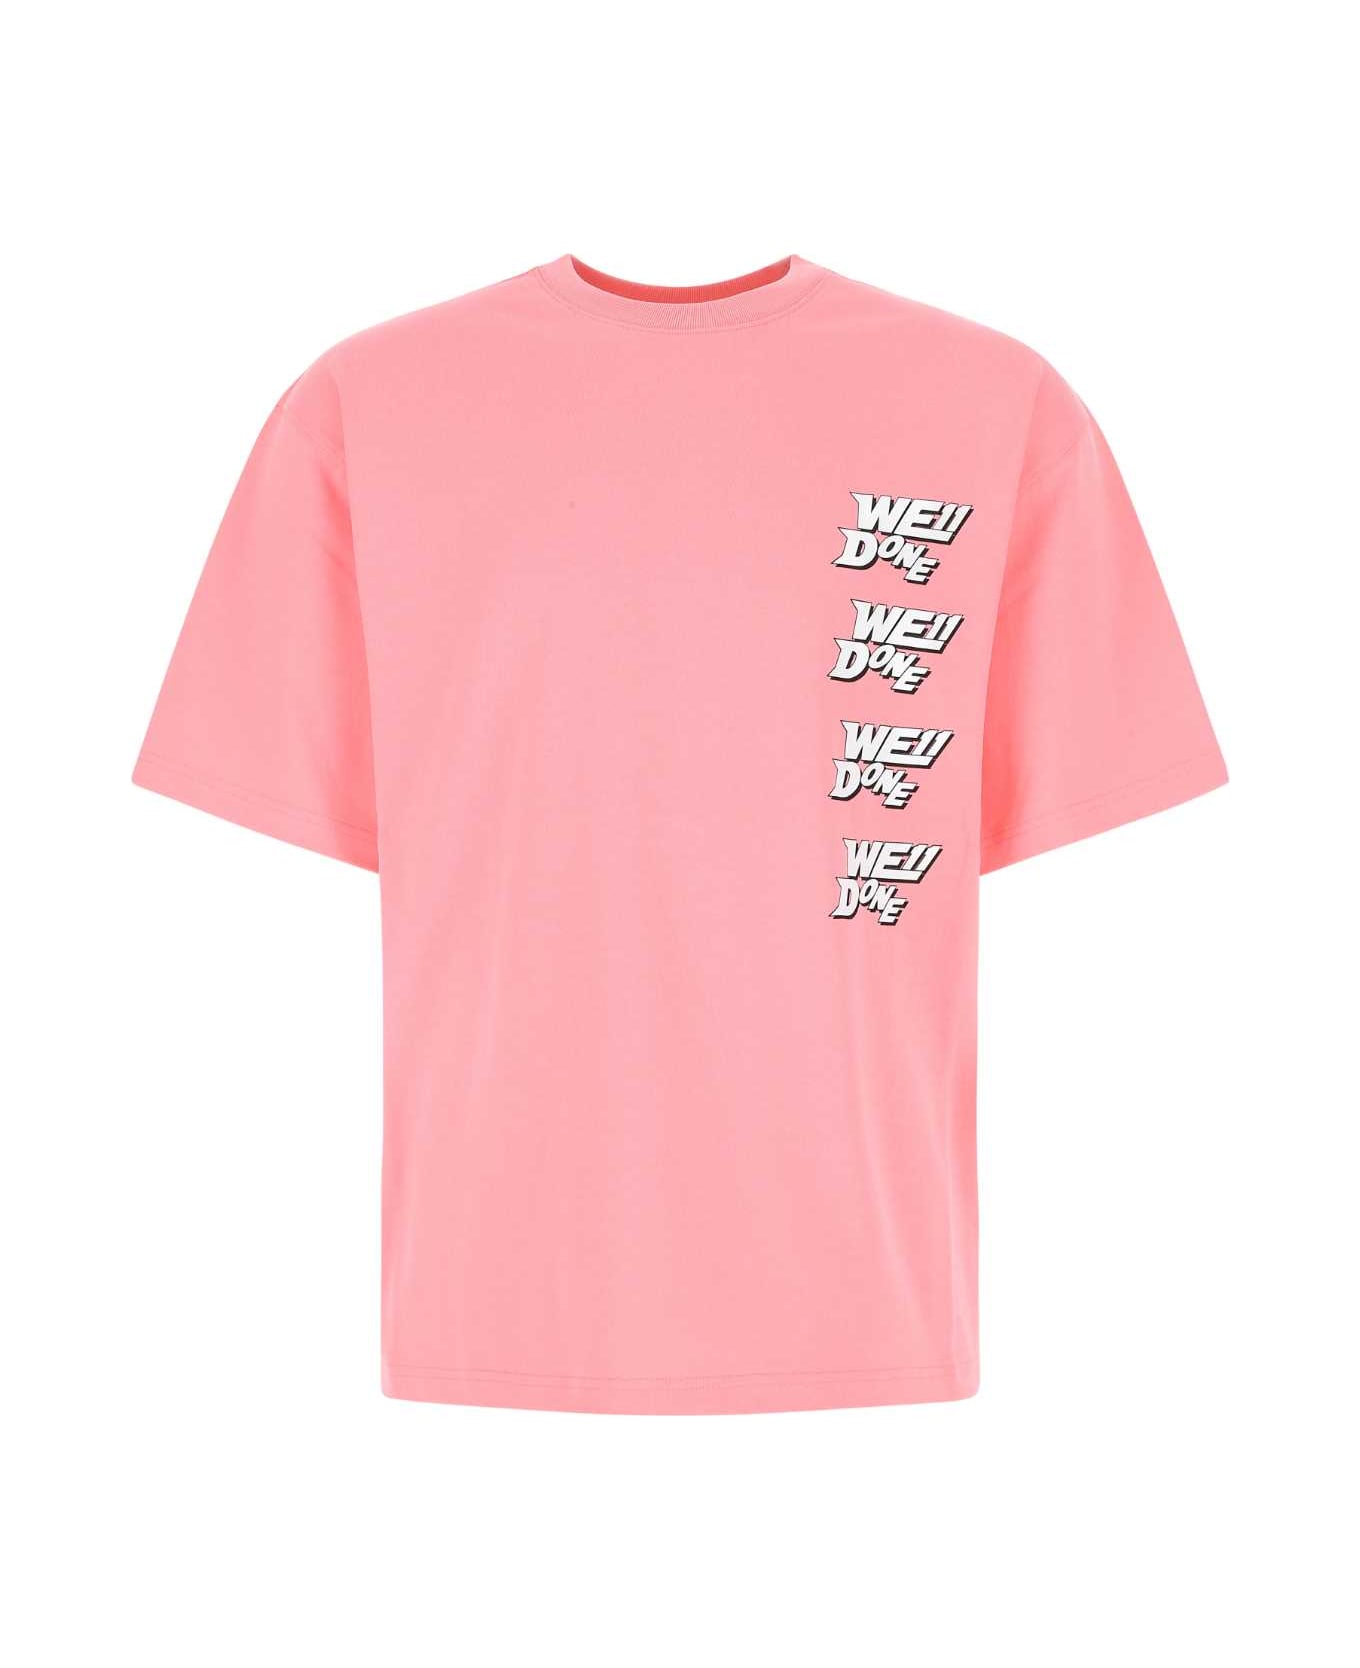 WE11 DONE Pink Cotton Oversize T-shirt - PINK シャツ